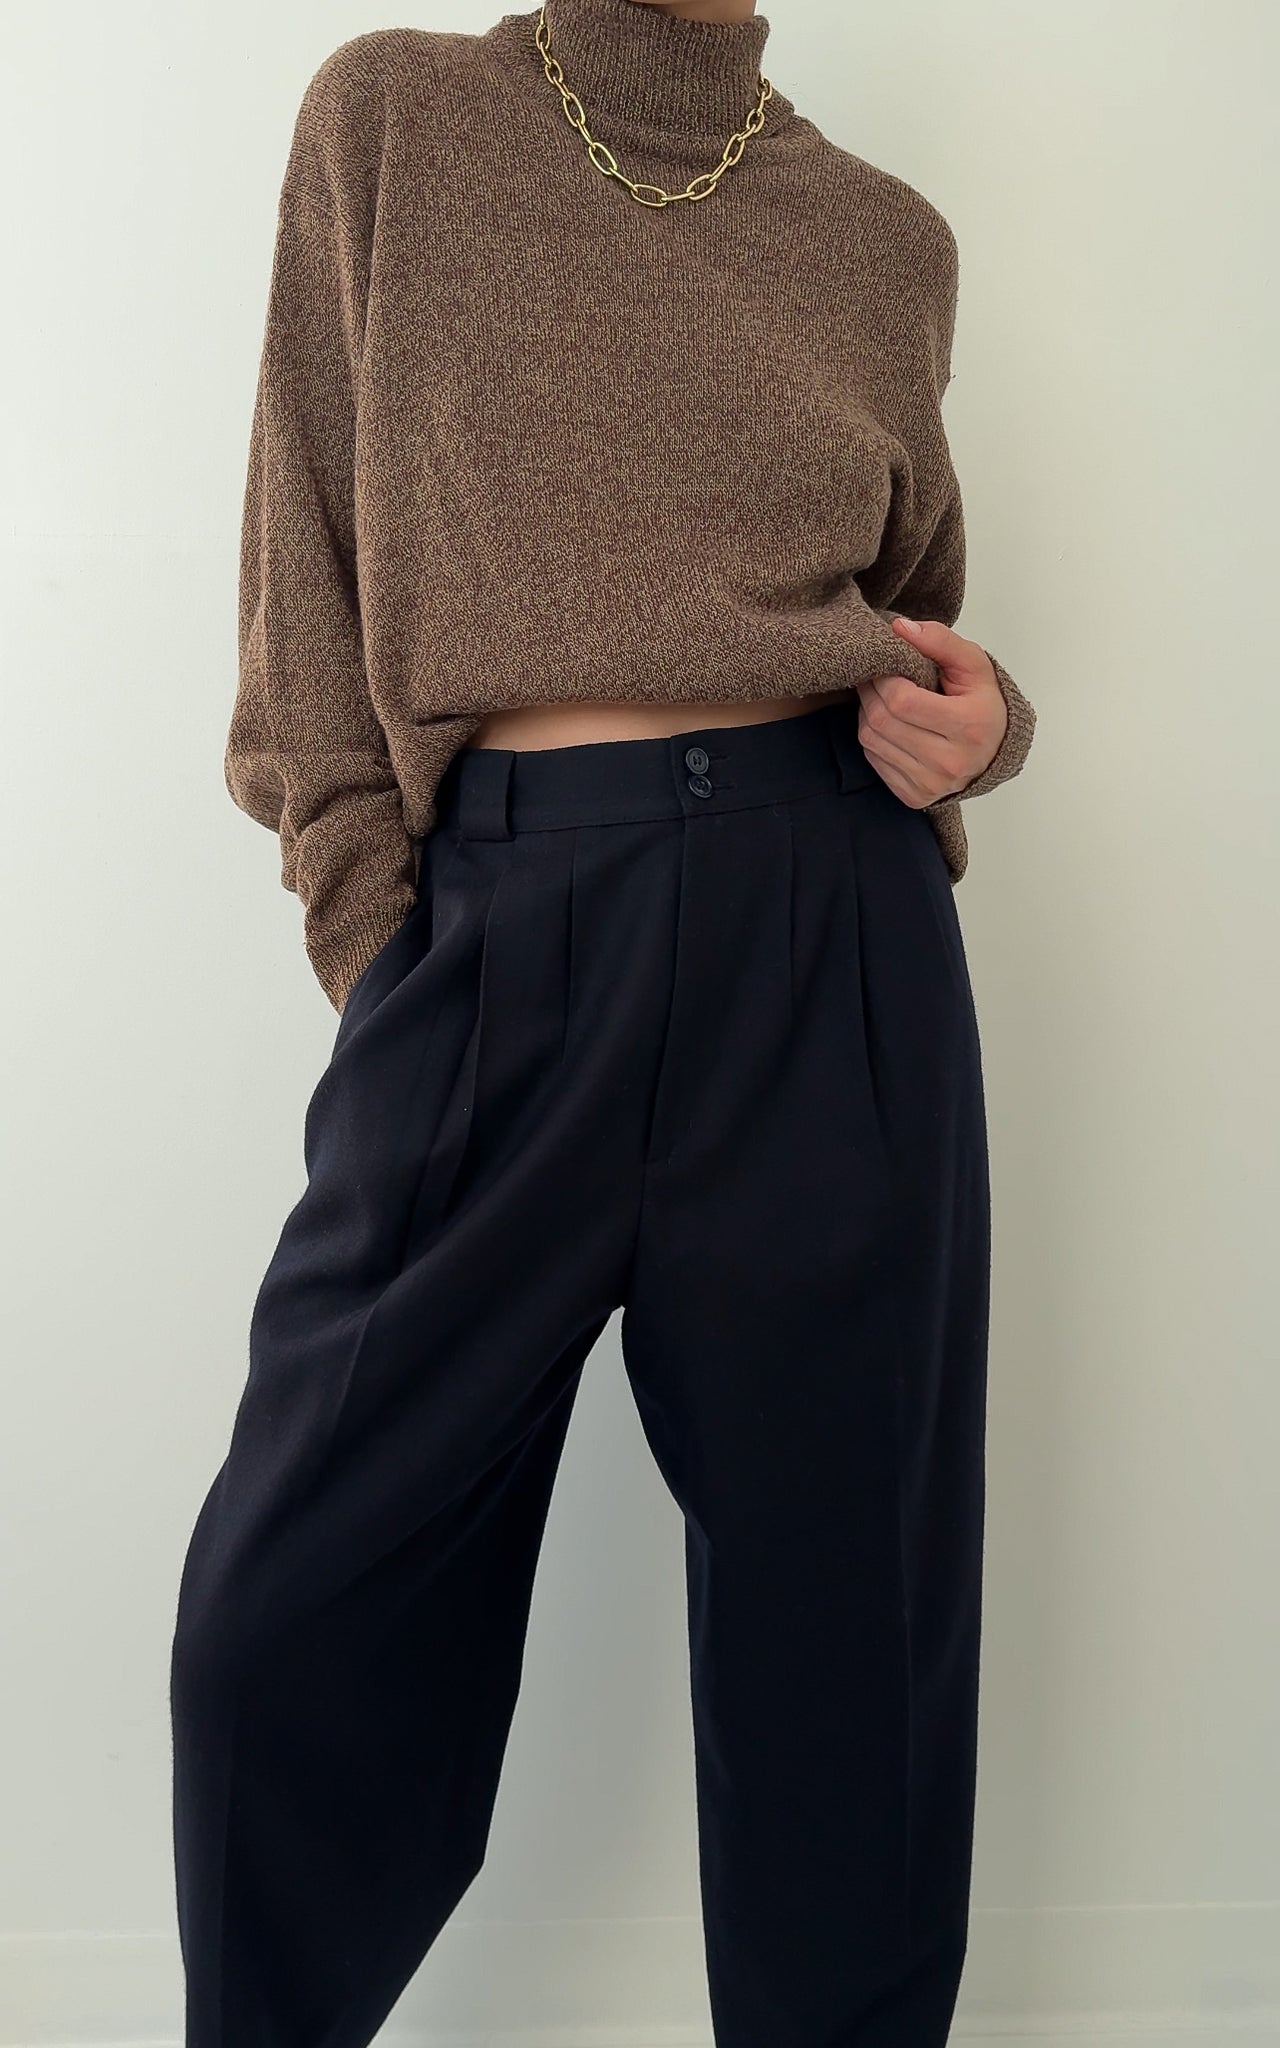 Vintage Minuit Wool High Waisted Trousers